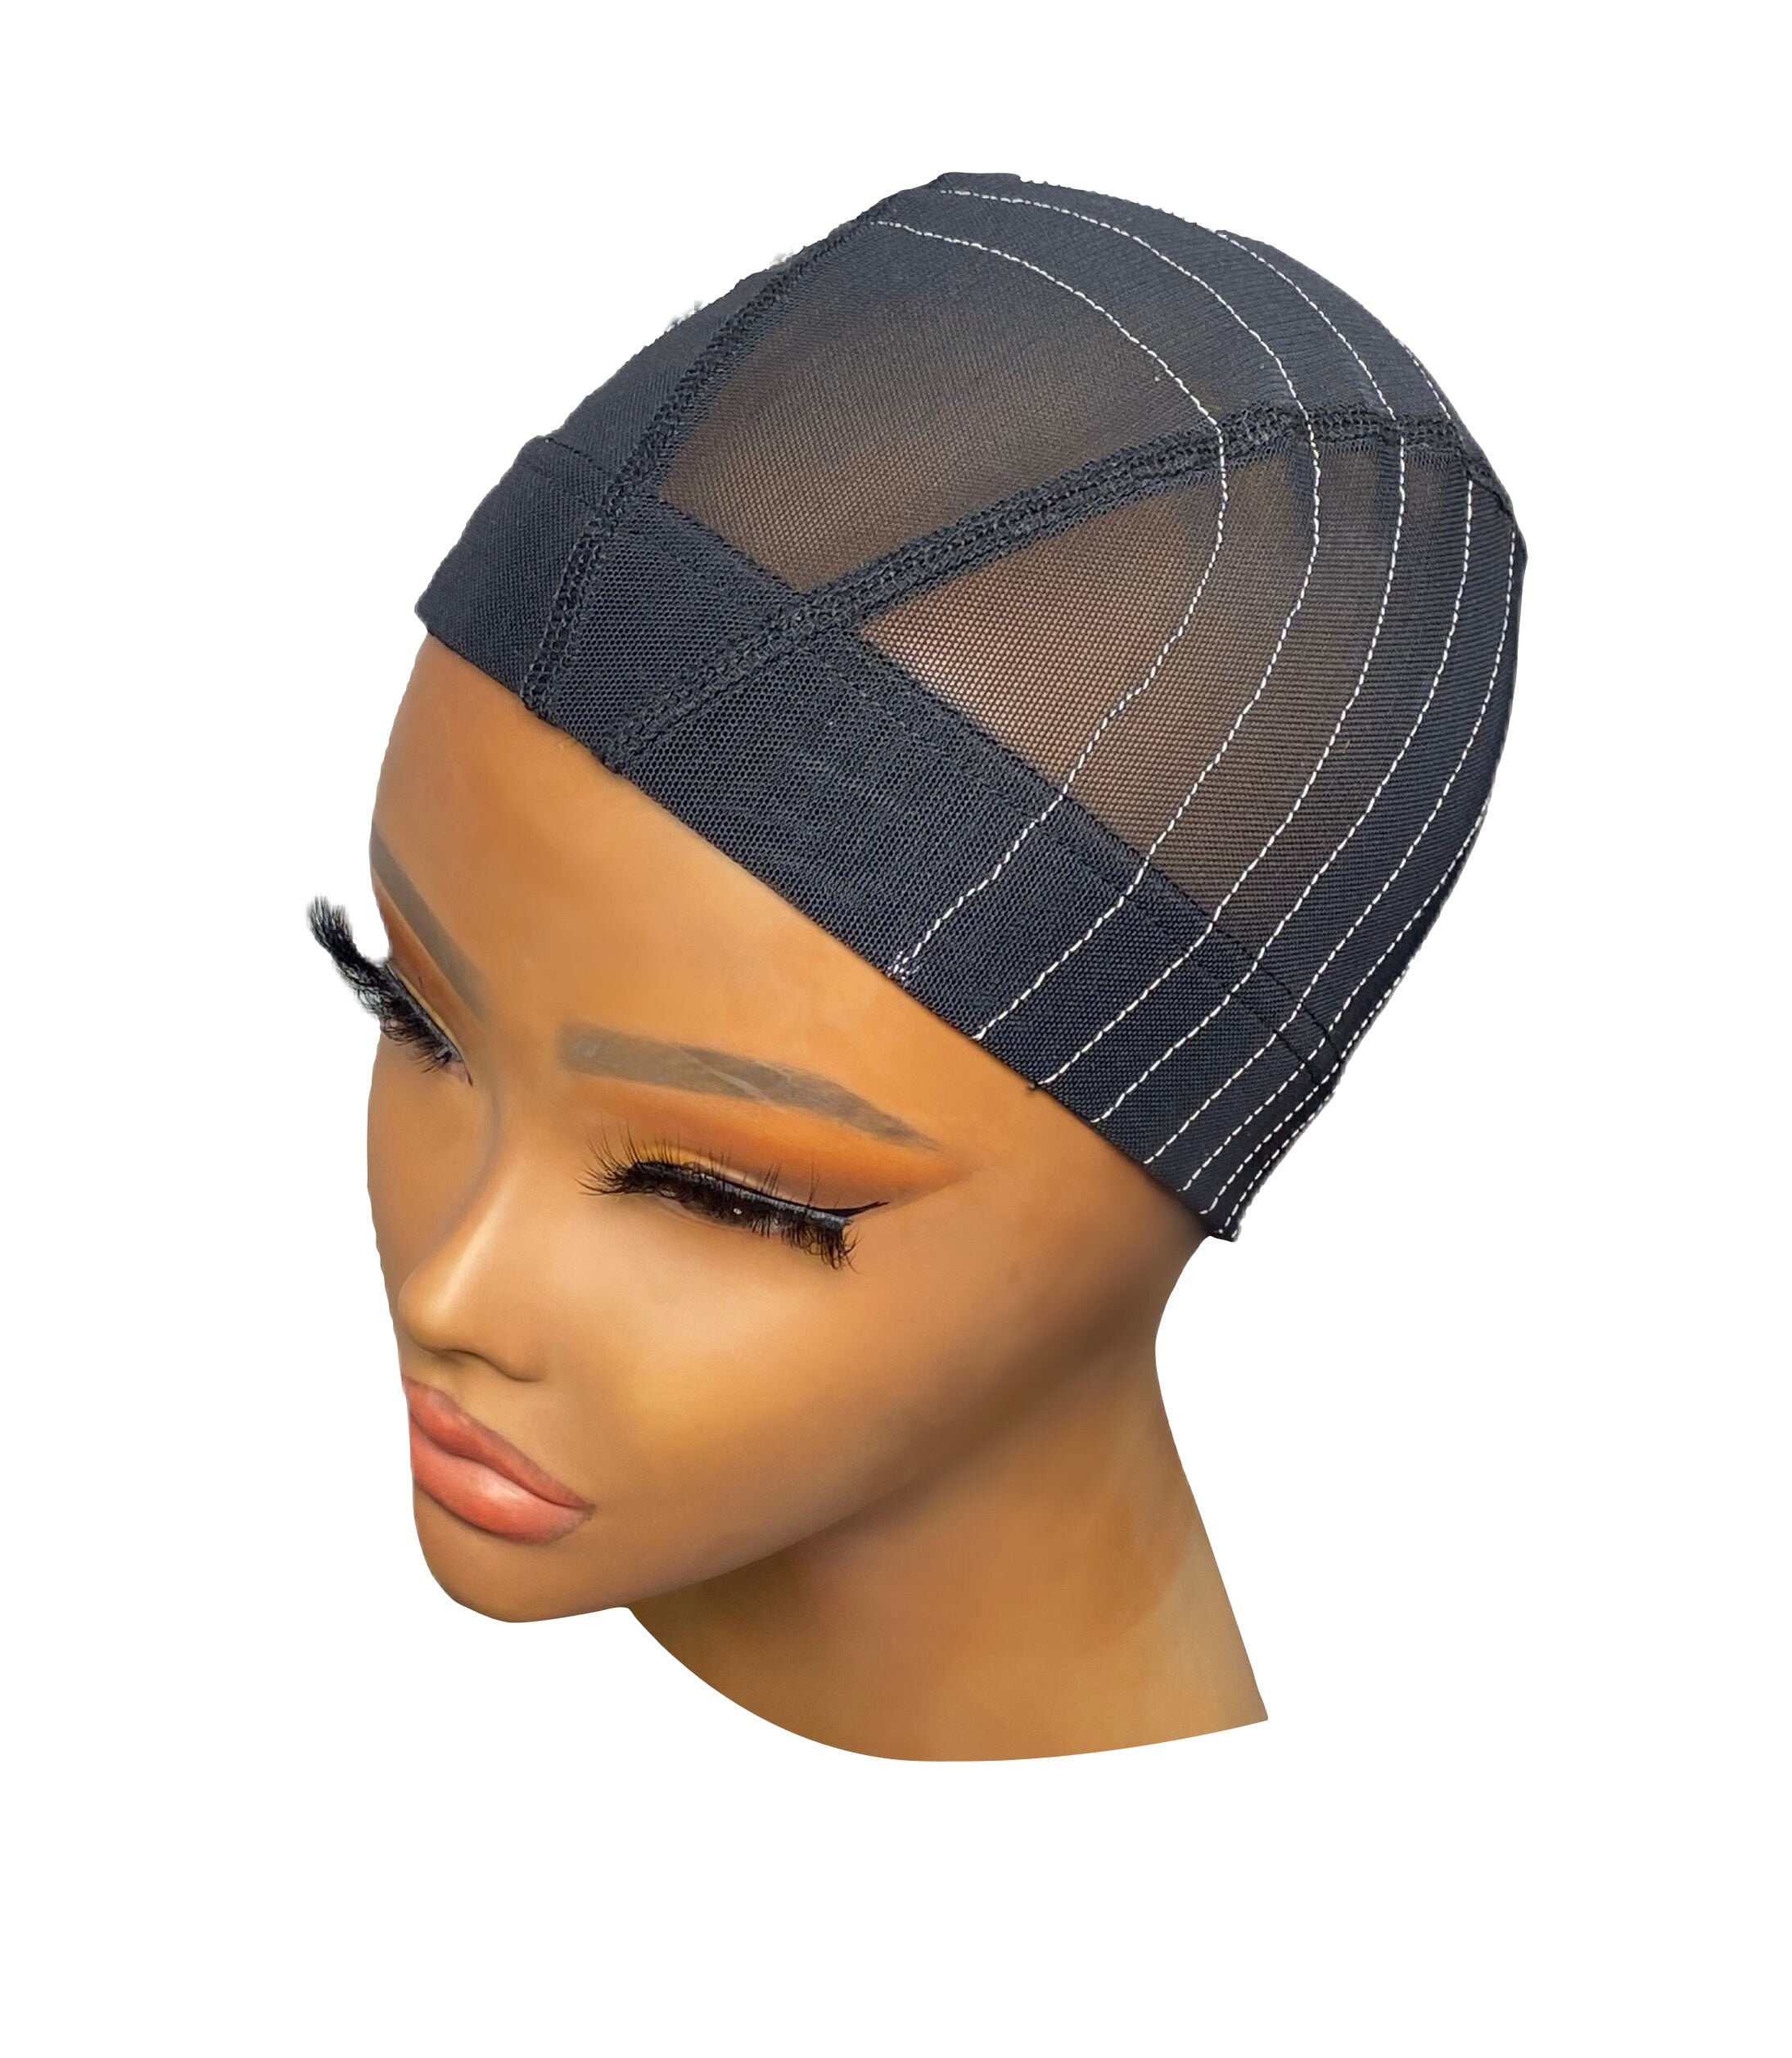 Full Lace Wig Cap, Nylon Thread, German and Asian Ventilation Needle, Wig  Making Lace: All You Need for Practice 